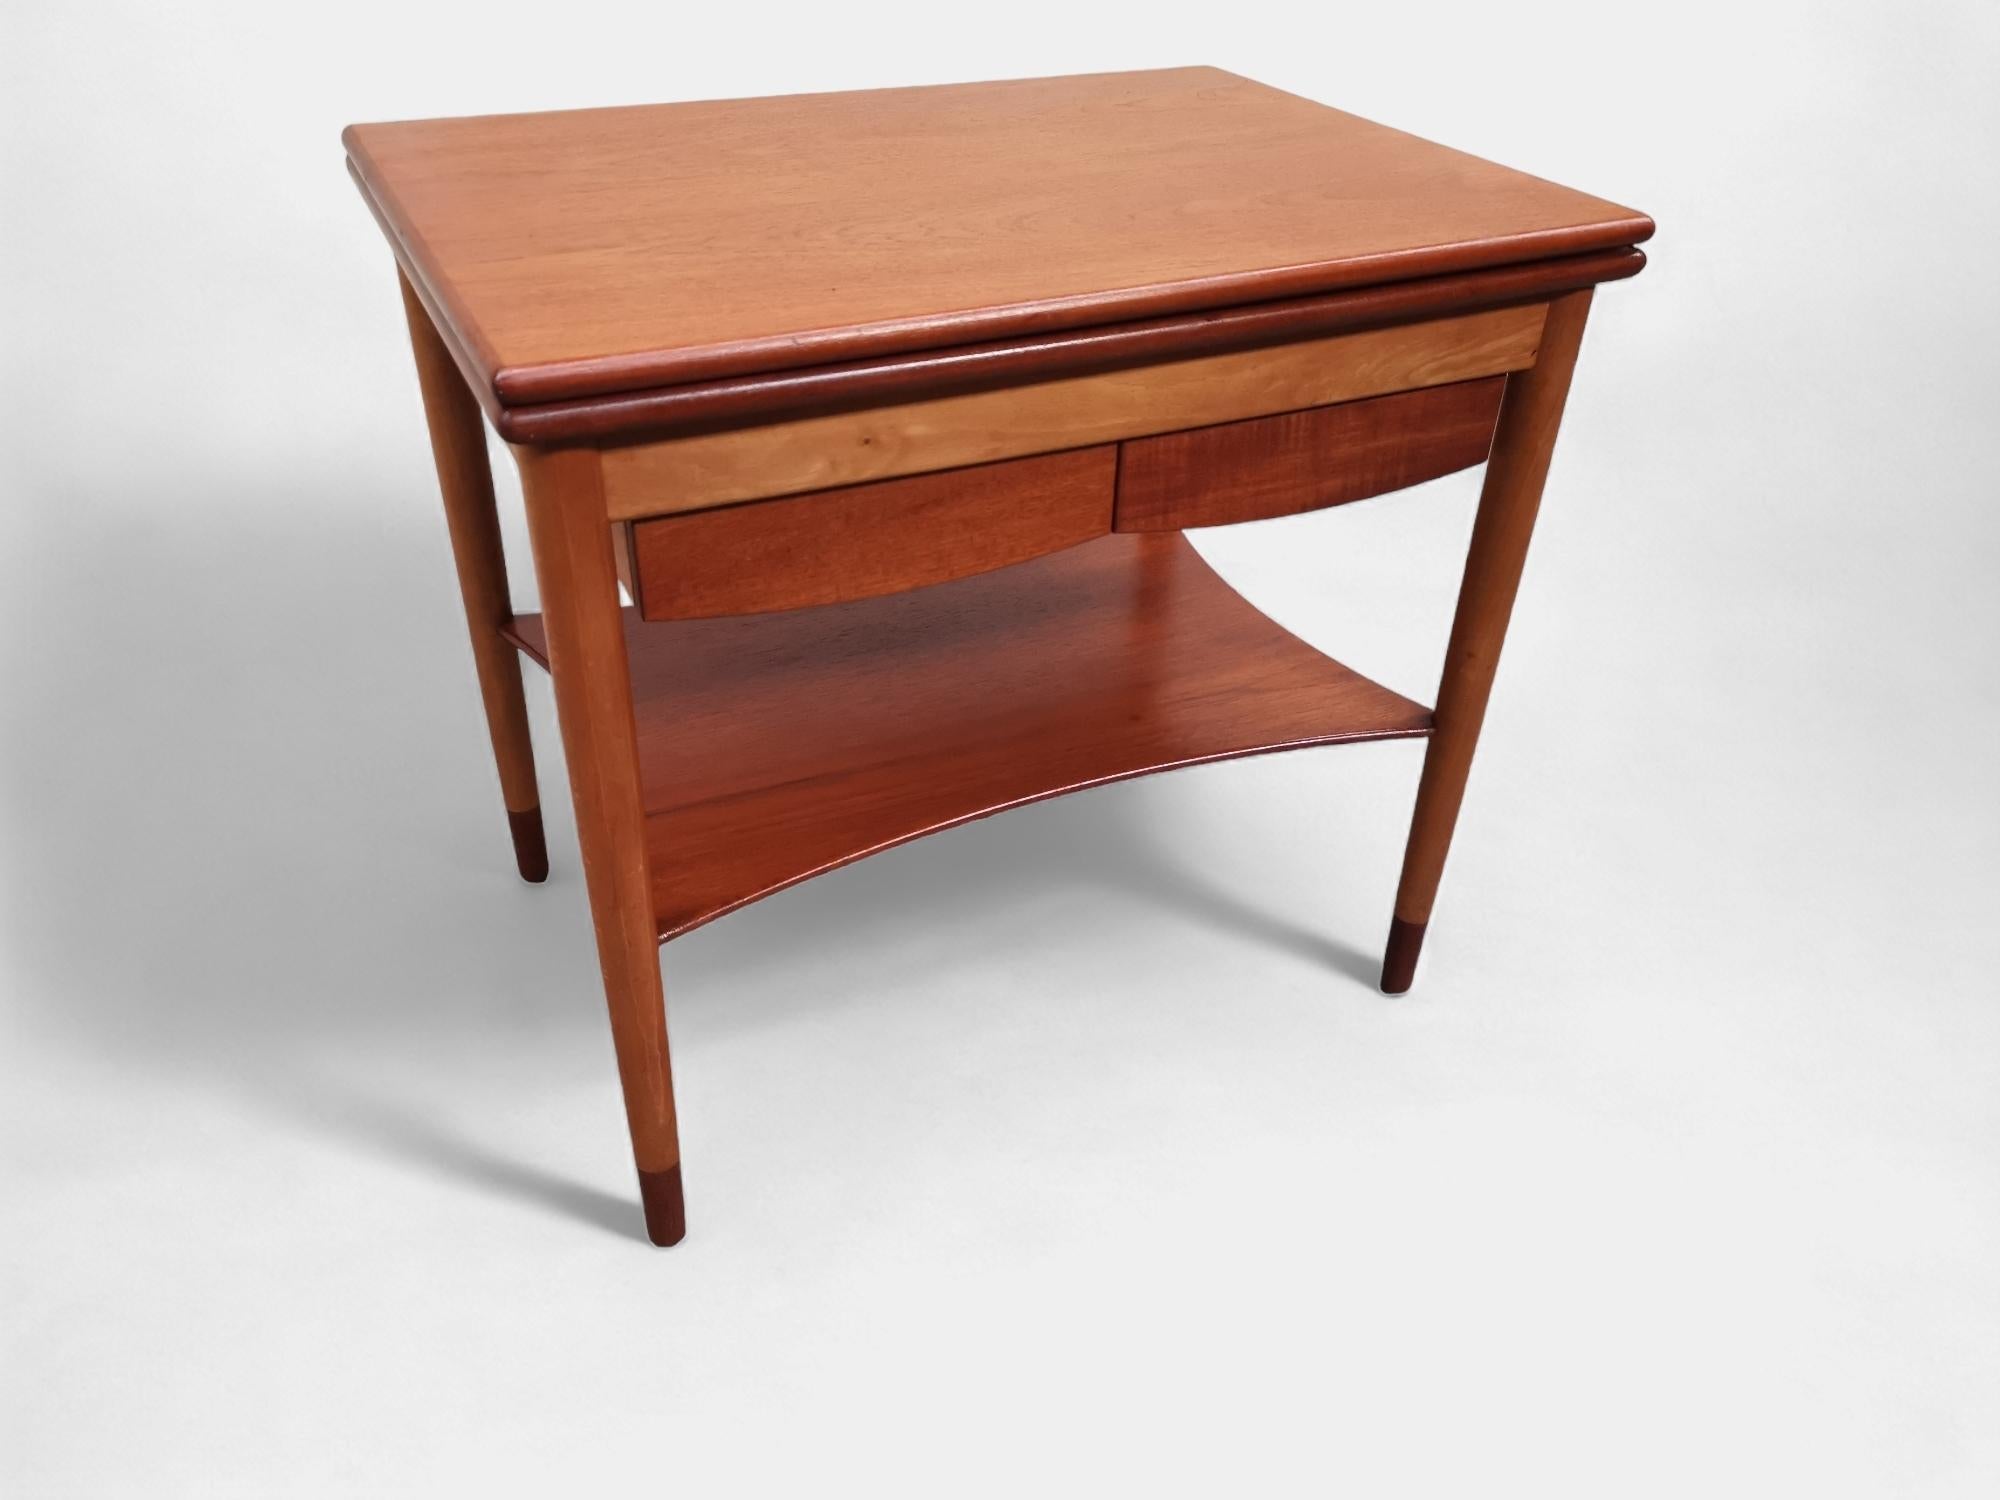 Danish Designer Børge Mogensen Coffee / Game Table Model 149. by Søborg møbelfabrik 1953.
The Table can flip so it can get dobbelt size, and under there are 2 drawers to your cards or other games. this one have Oak legs with teak shoes.